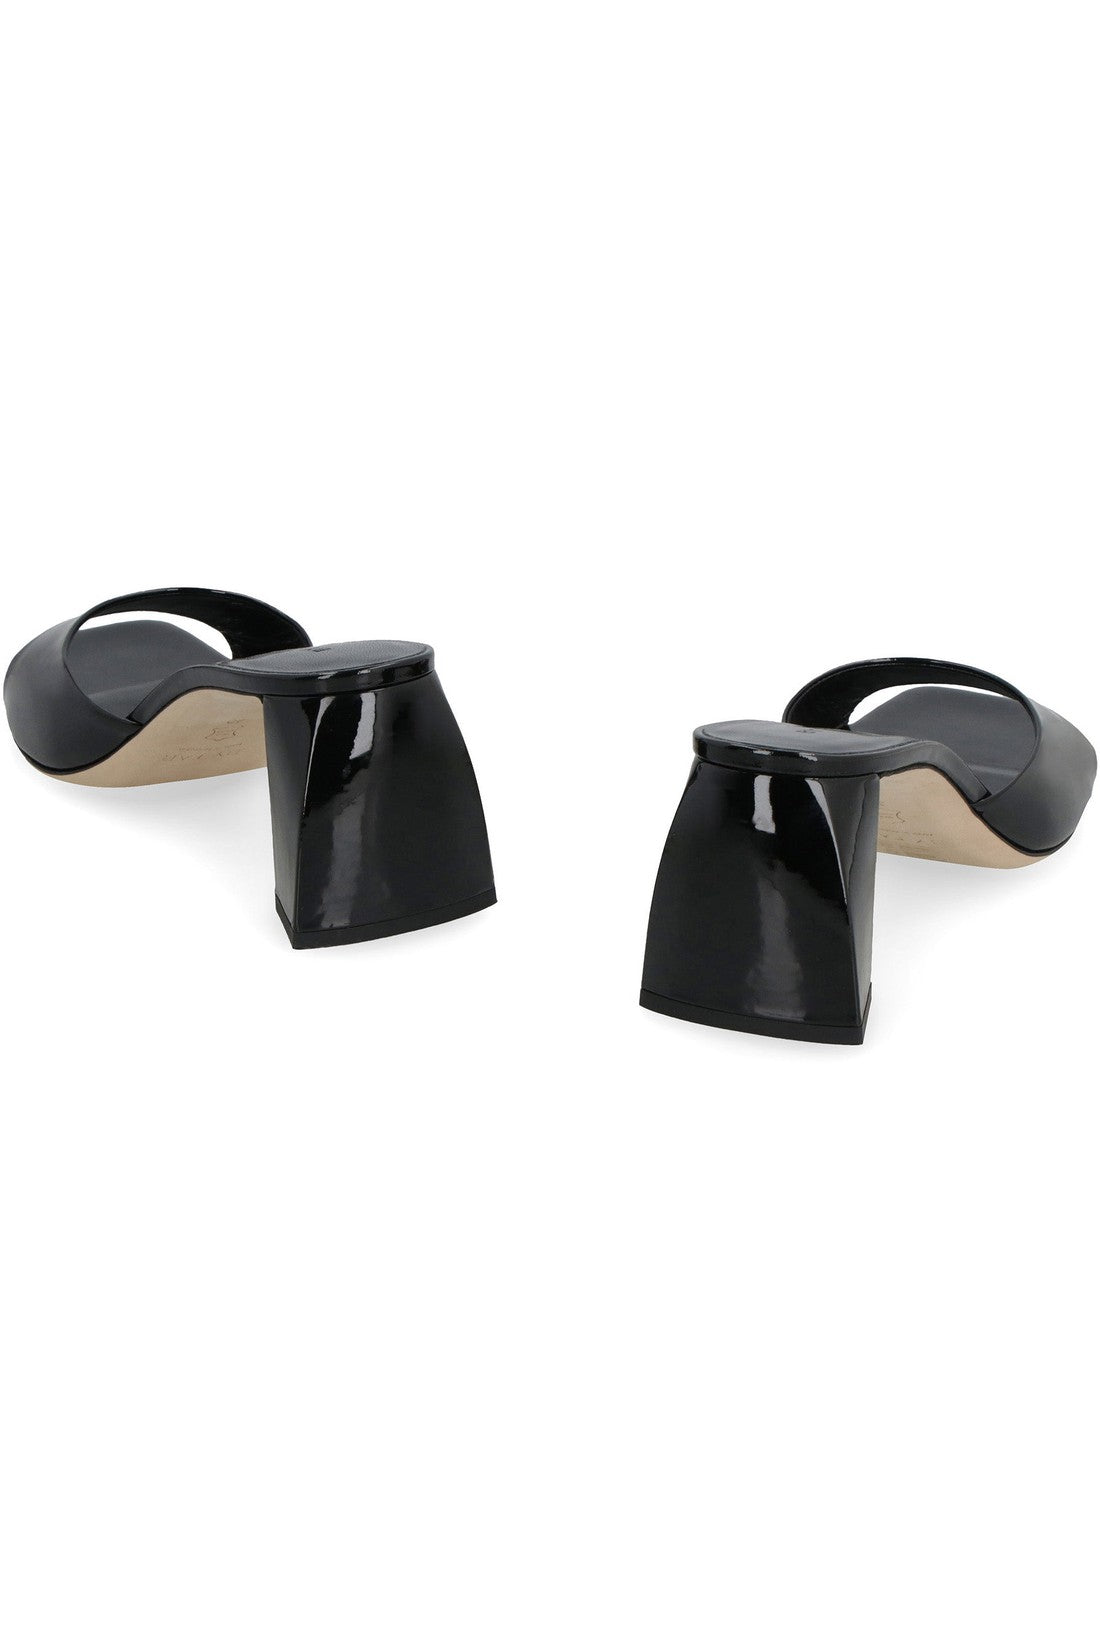 BY FAR-OUTLET-SALE-Romy patent leather mules-ARCHIVIST